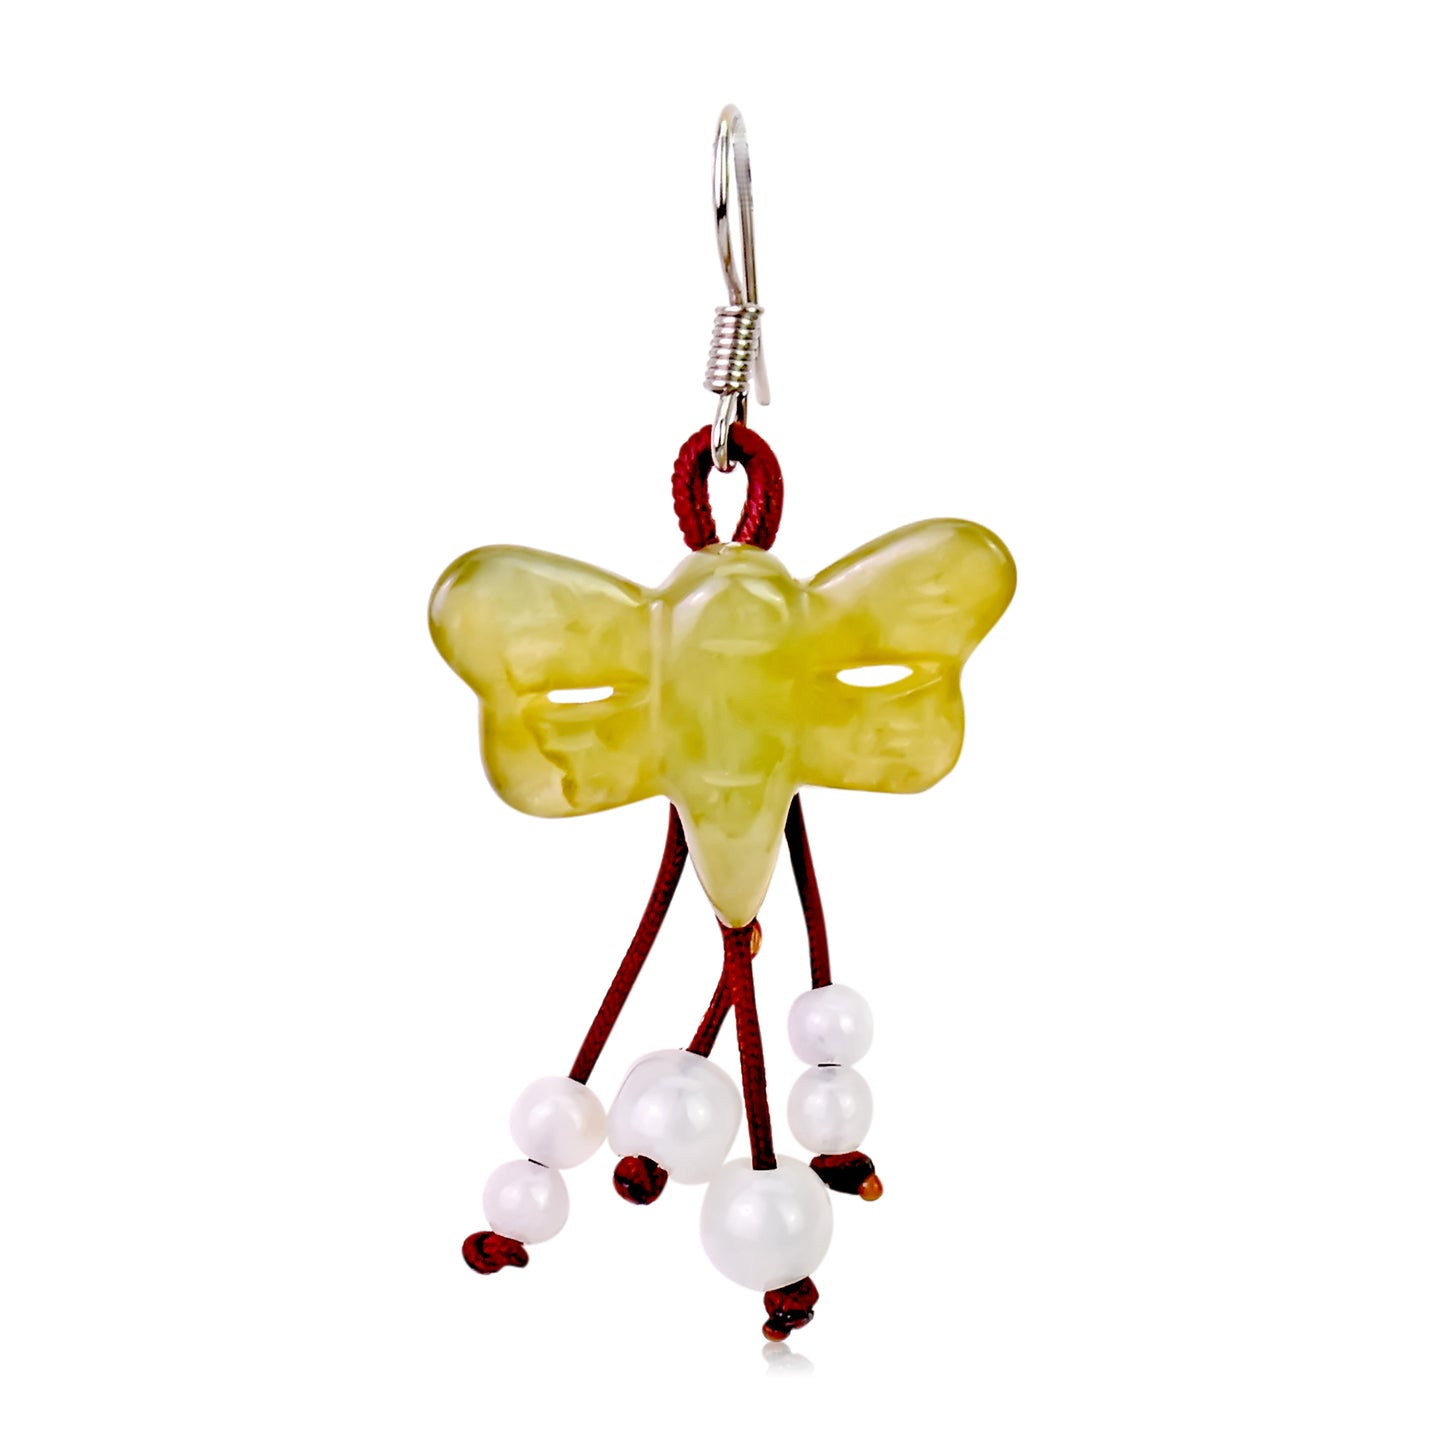 Experience the Magic with Wonderous Dragonfly Earrings